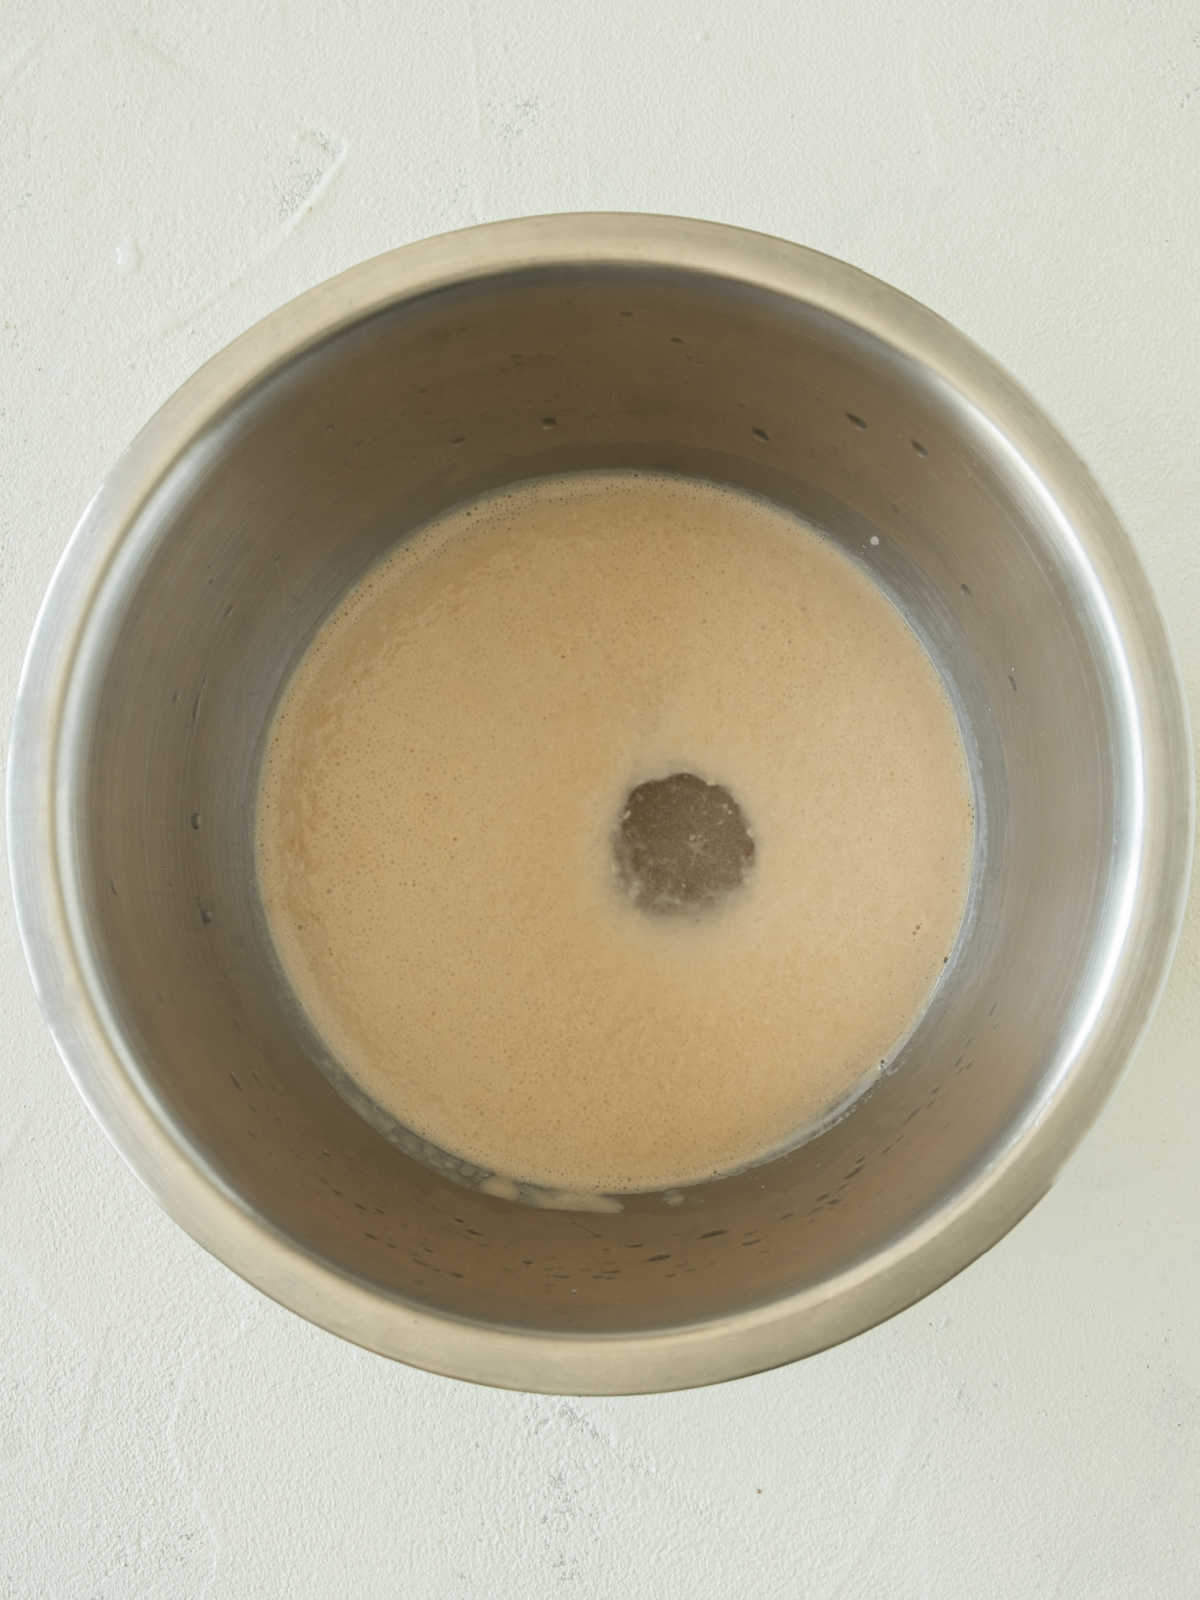 Yeast foaming with water in a metal bowl. Whitish gray surface.